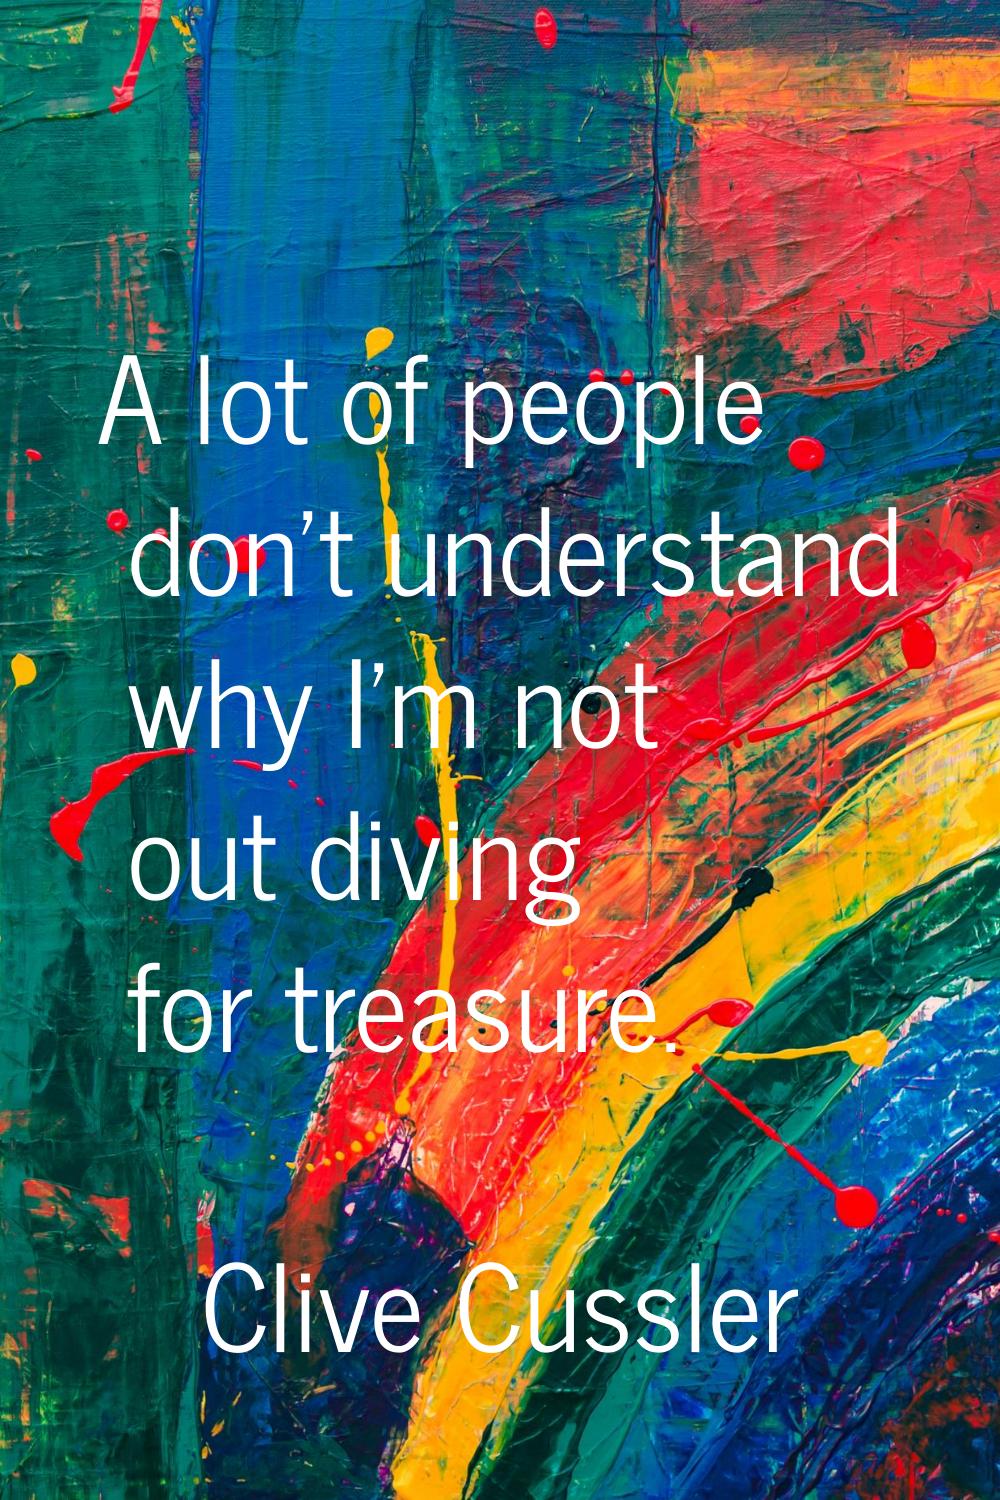 A lot of people don't understand why I'm not out diving for treasure.